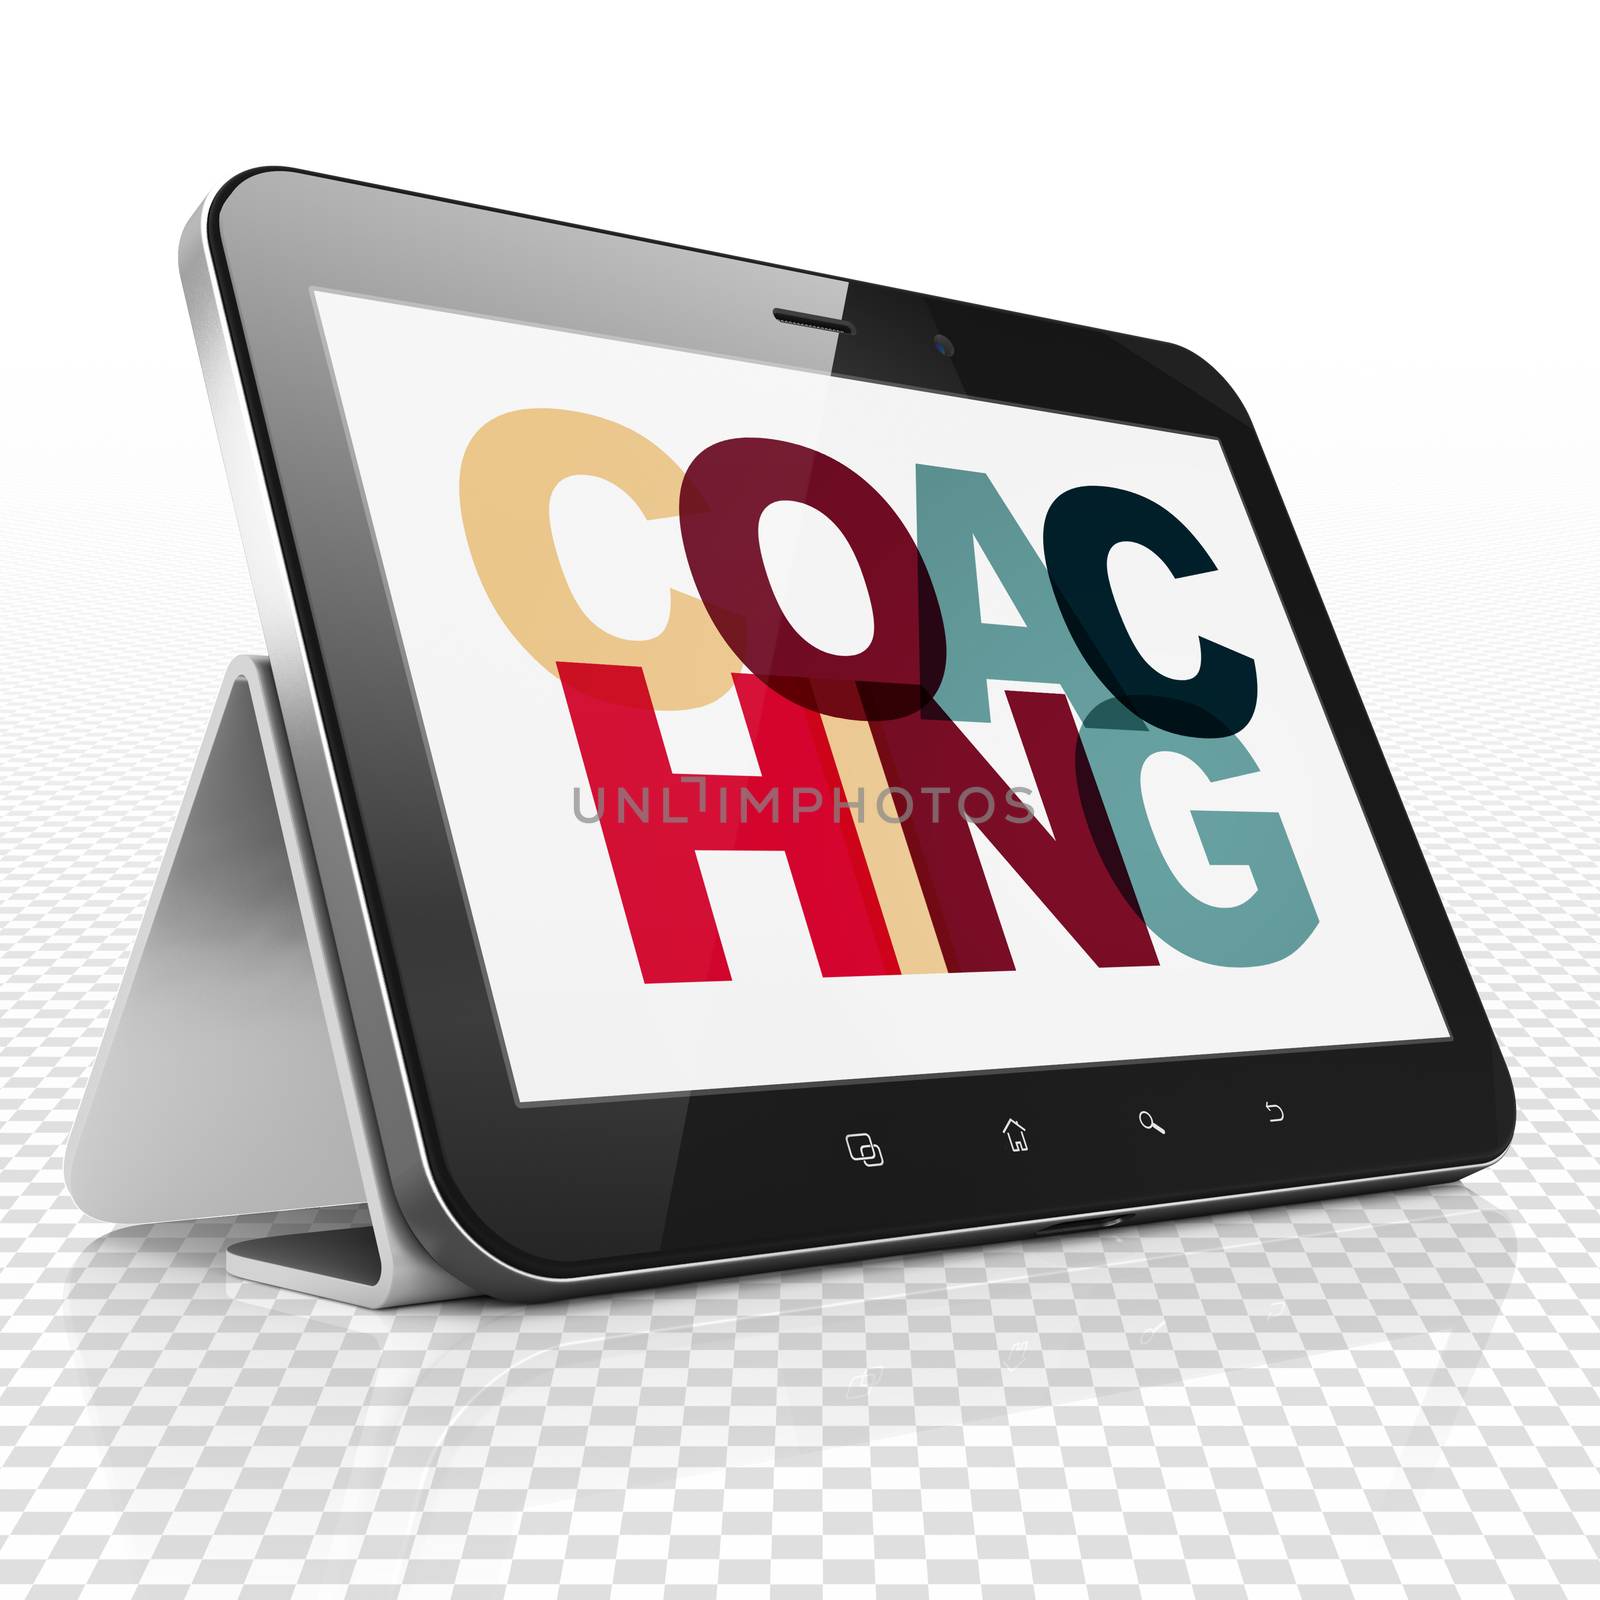 Education concept: Tablet Computer with Painted multicolor text Coaching on display